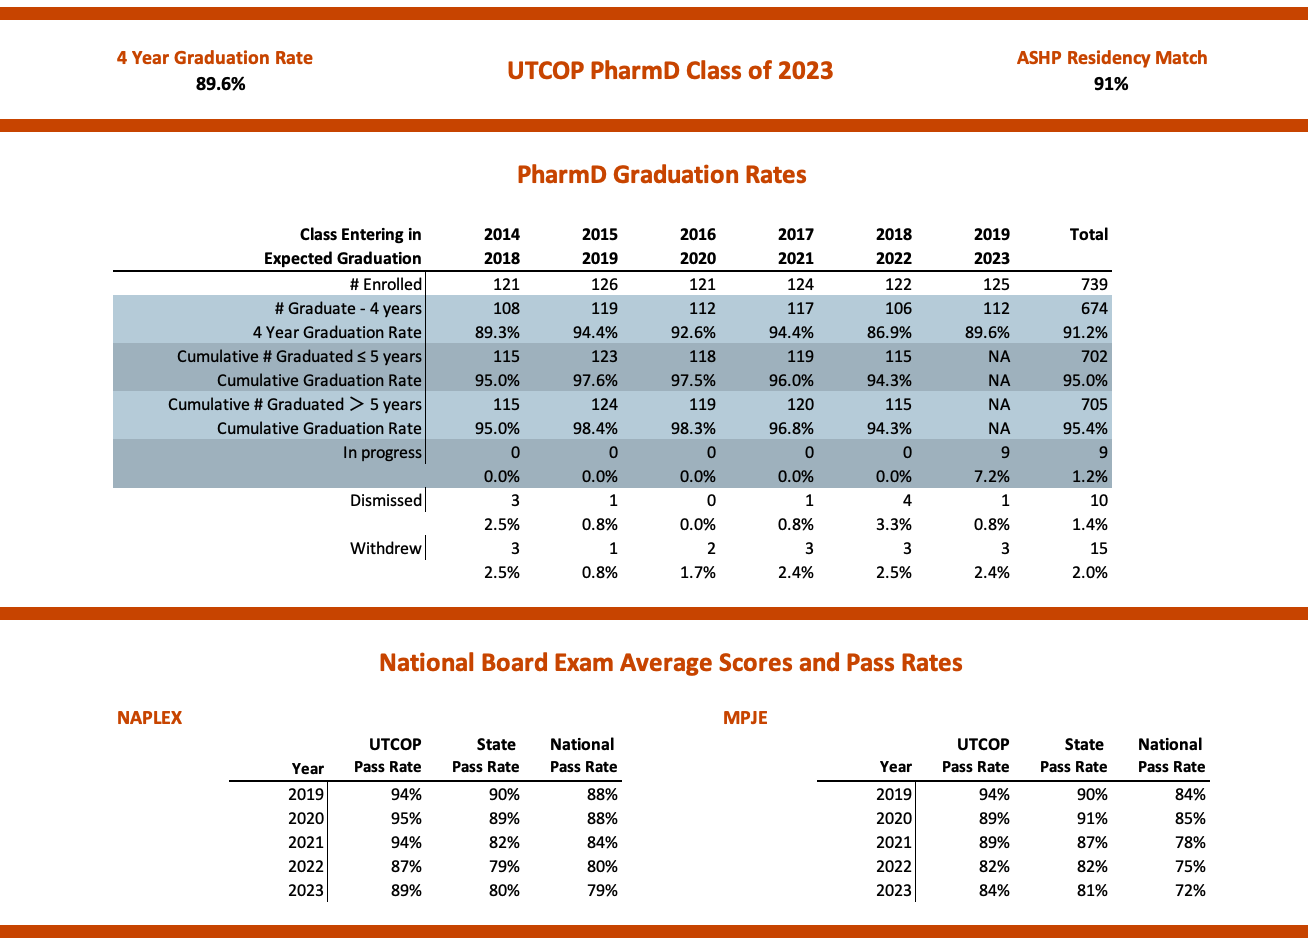 Data charts showing Pharm.D. Graduation rates for 2018 through 2023 and national board exam pass rates for 2019 through 2023.